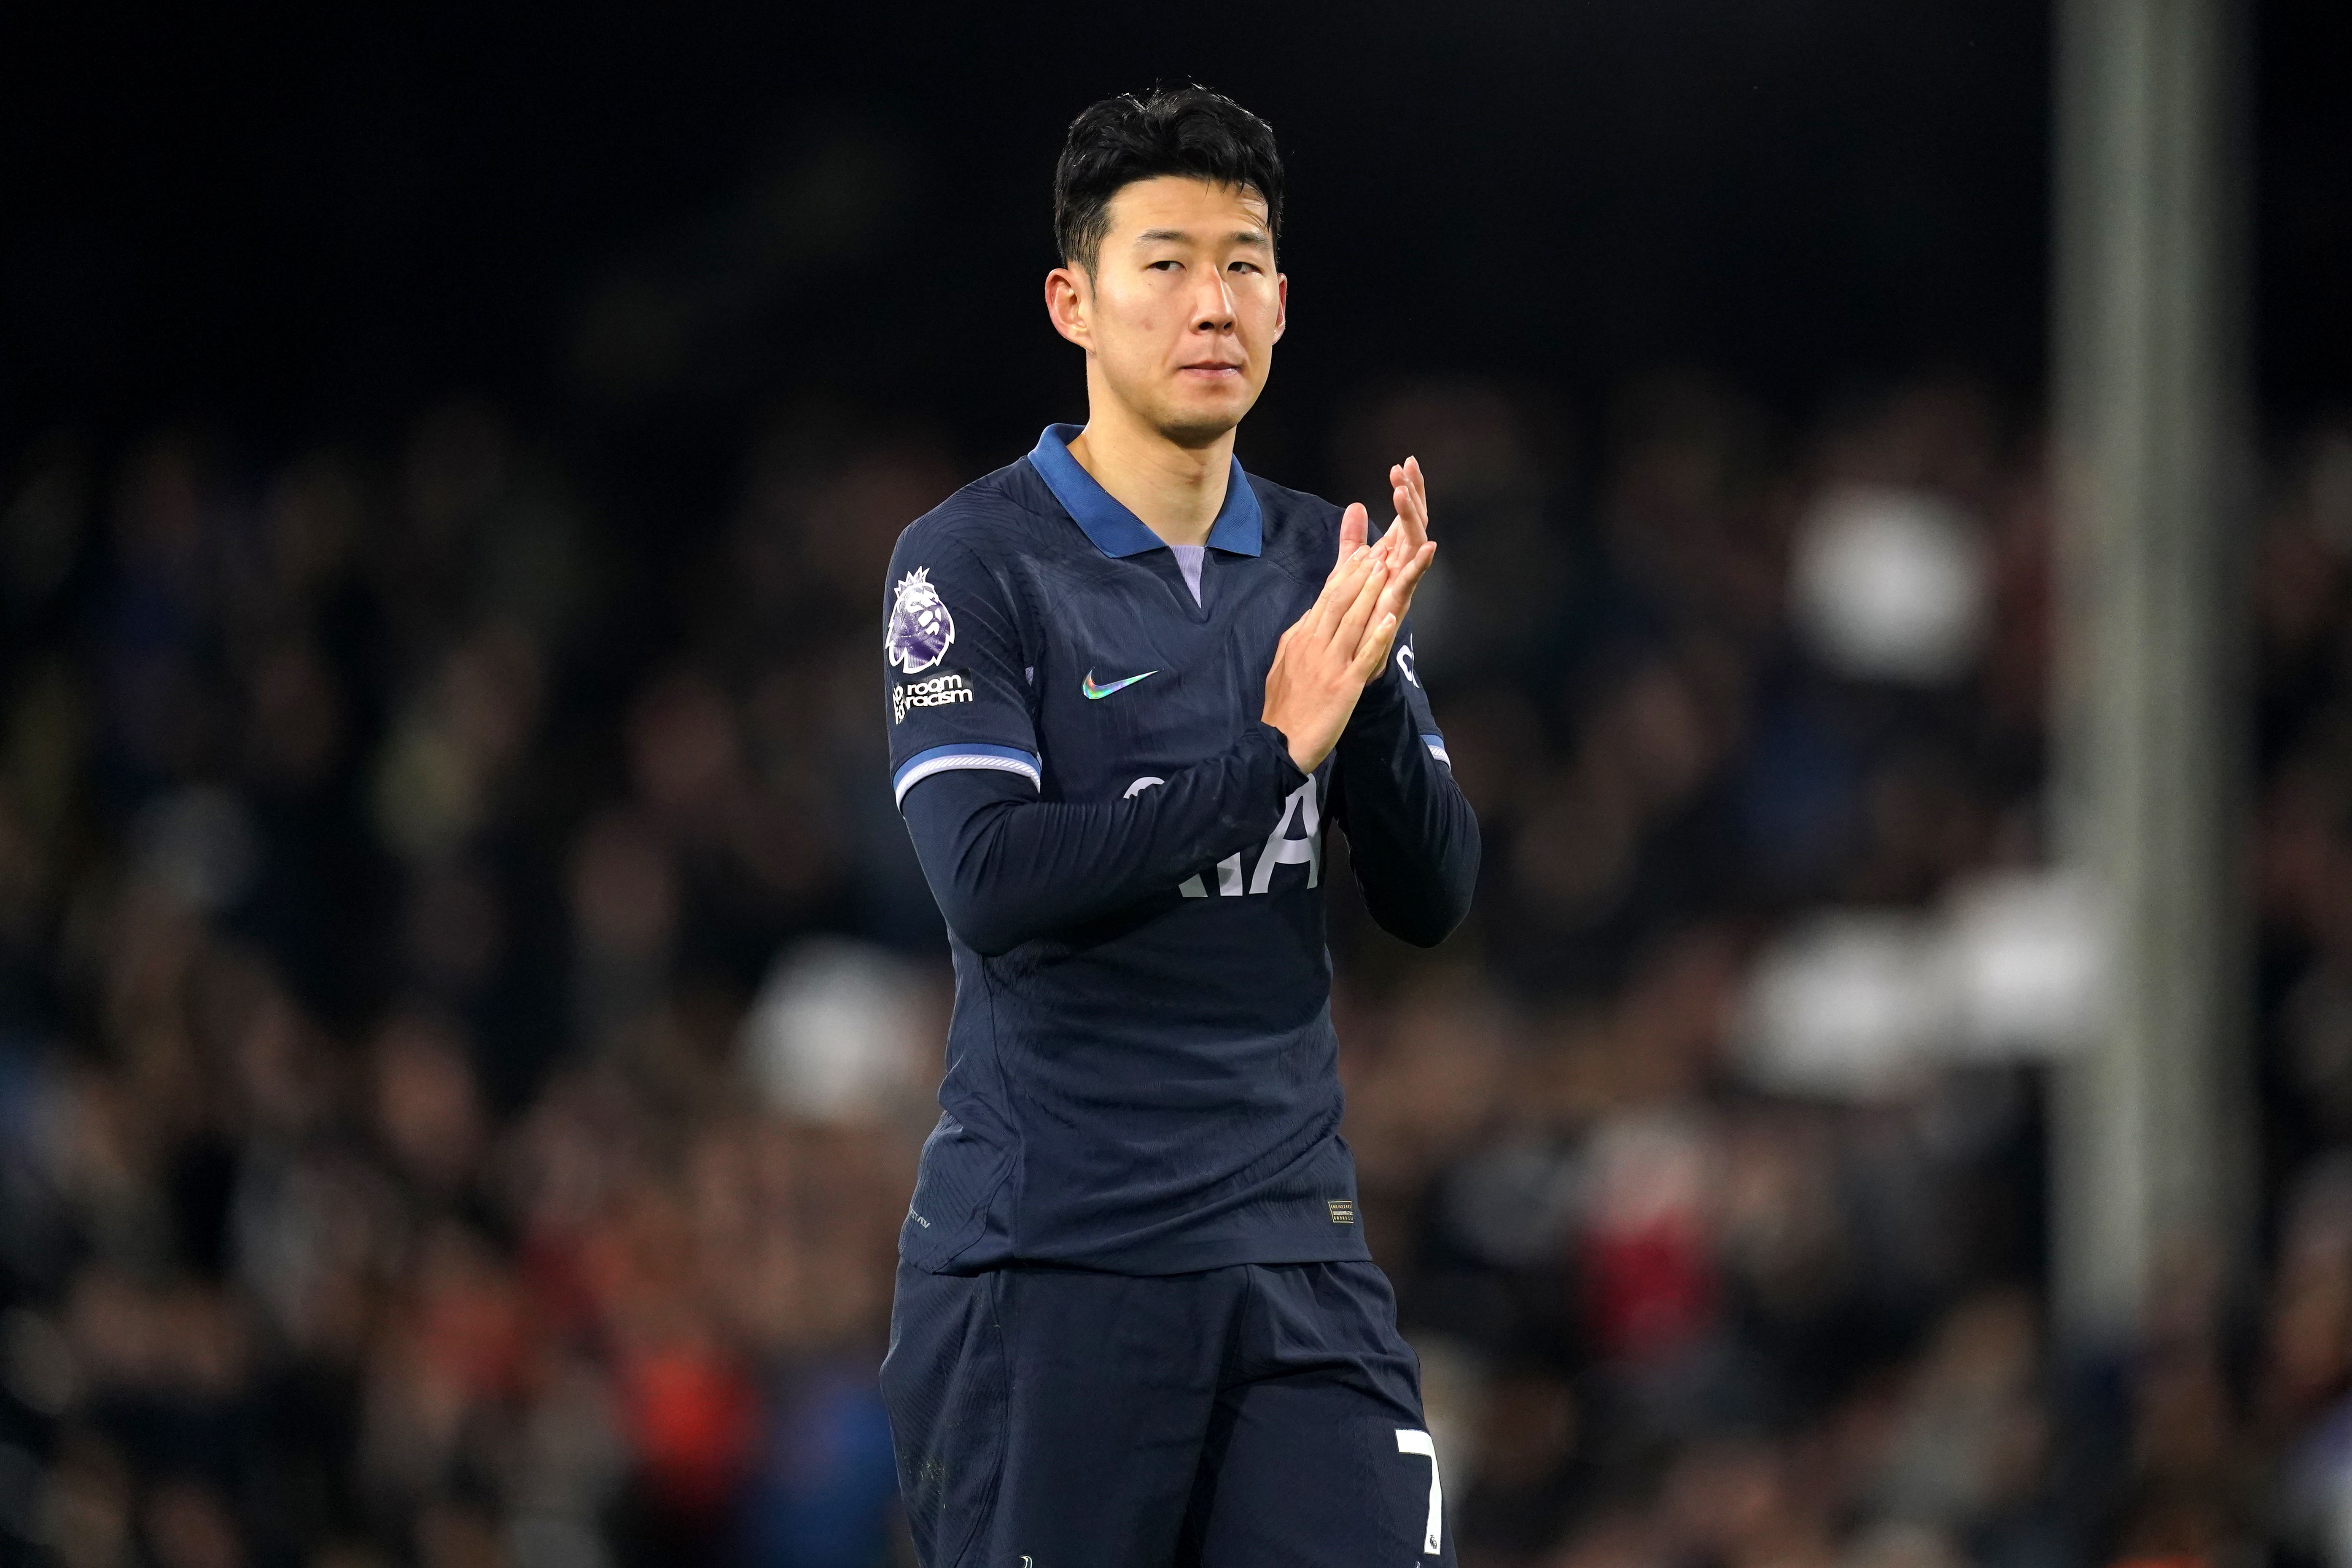 Son Heung-min applauds the Tottenham fans after a 3-0 loss at Fulham (Adam Davy/PA)